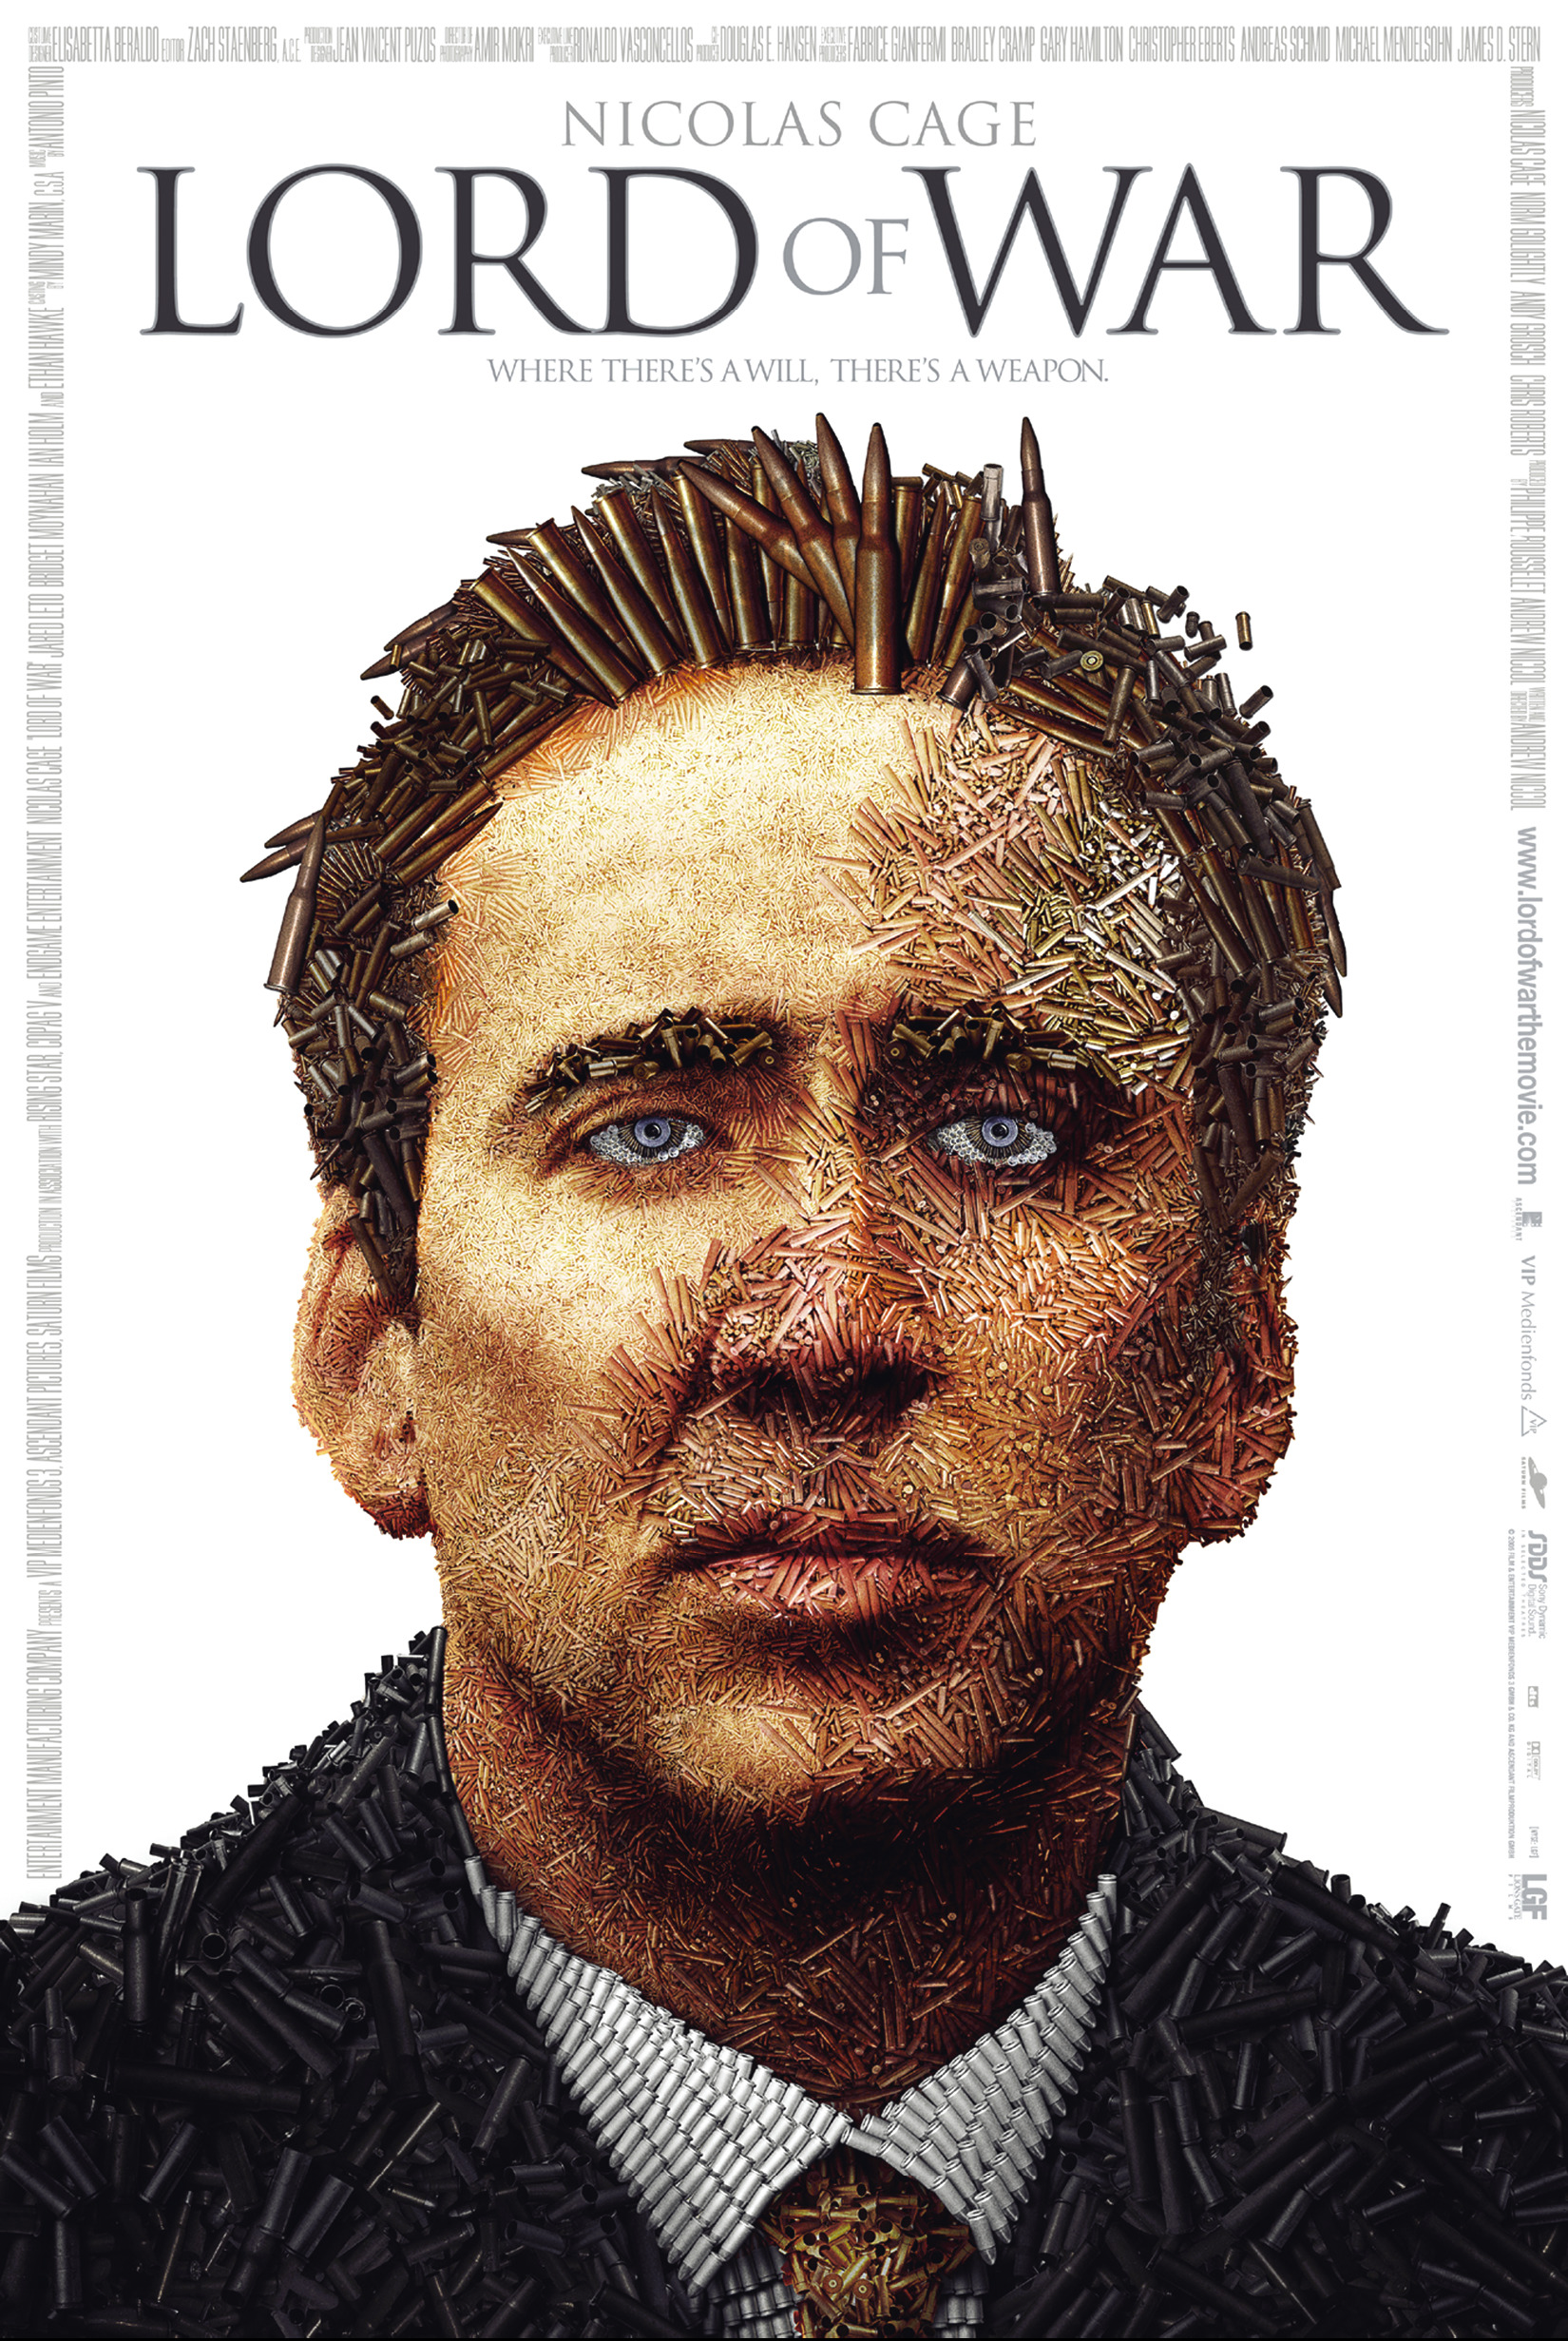 Film posters, White background, Nicolas Cage, Ammunition, Lord of War, Digital art Wallpaper